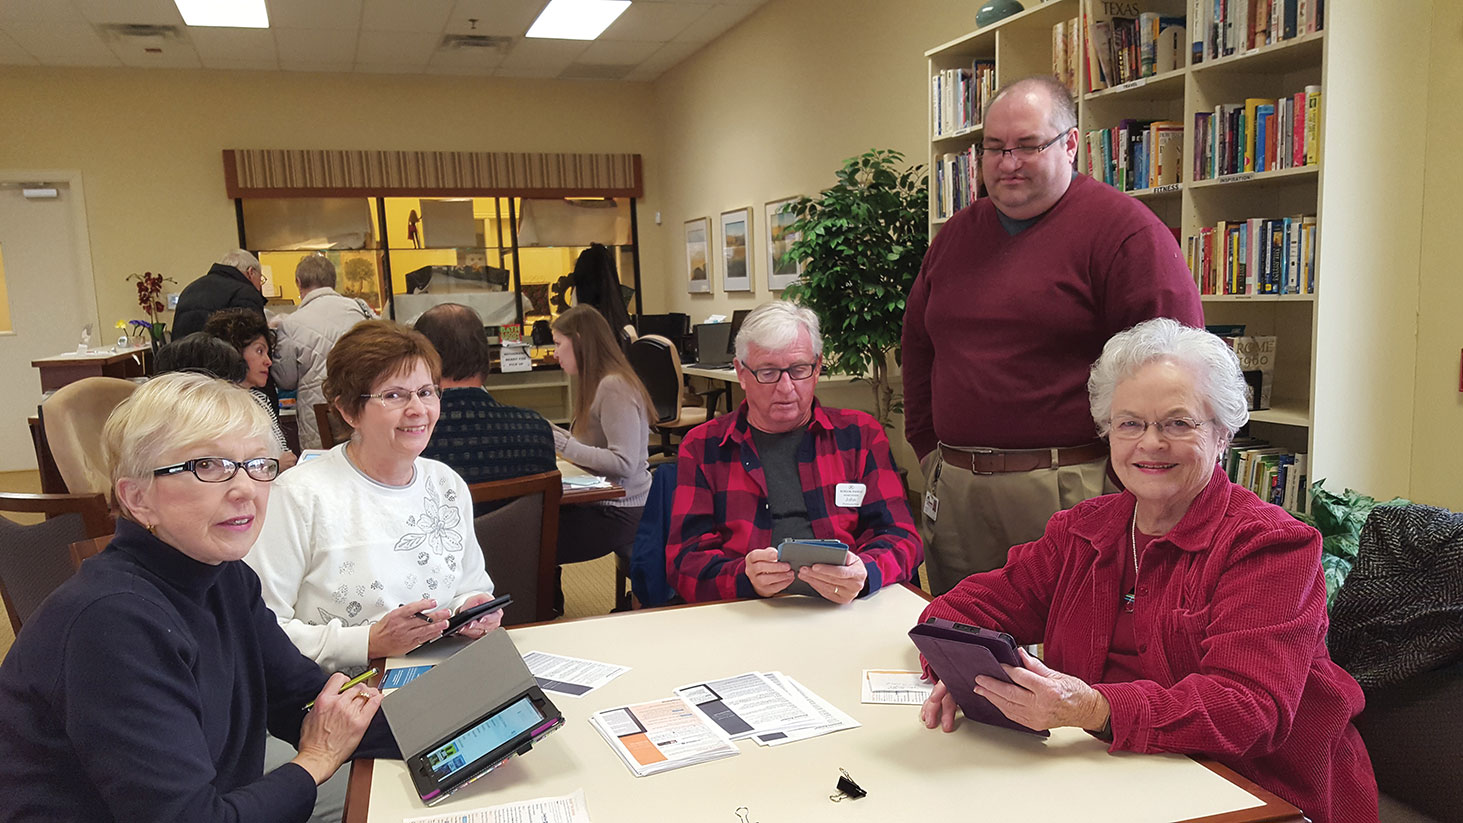 Kindle users in various stages of mastering their Kindles. Melba Beckham looks especially proud that she is ready to read digitally! Mary Robde, Rae Kimmel, John Fernandes, Denton librarian Jess Turner and Melba Beckham.